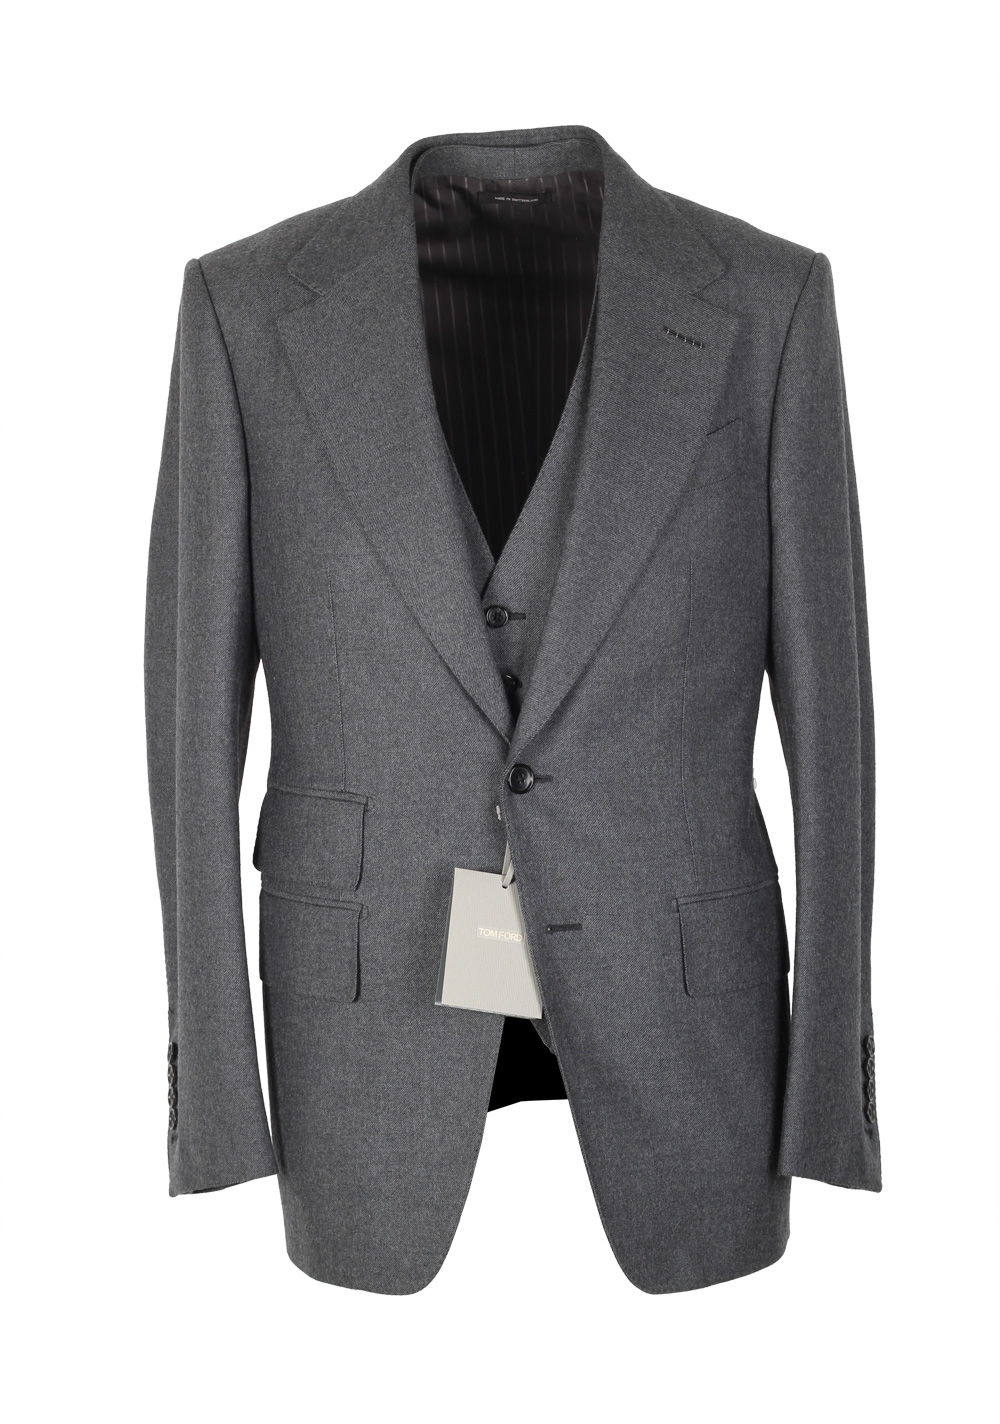 TOM FORD Shelton Solid Gray 3 Piece Suit Size 46 / 36R U.S. Wool ...